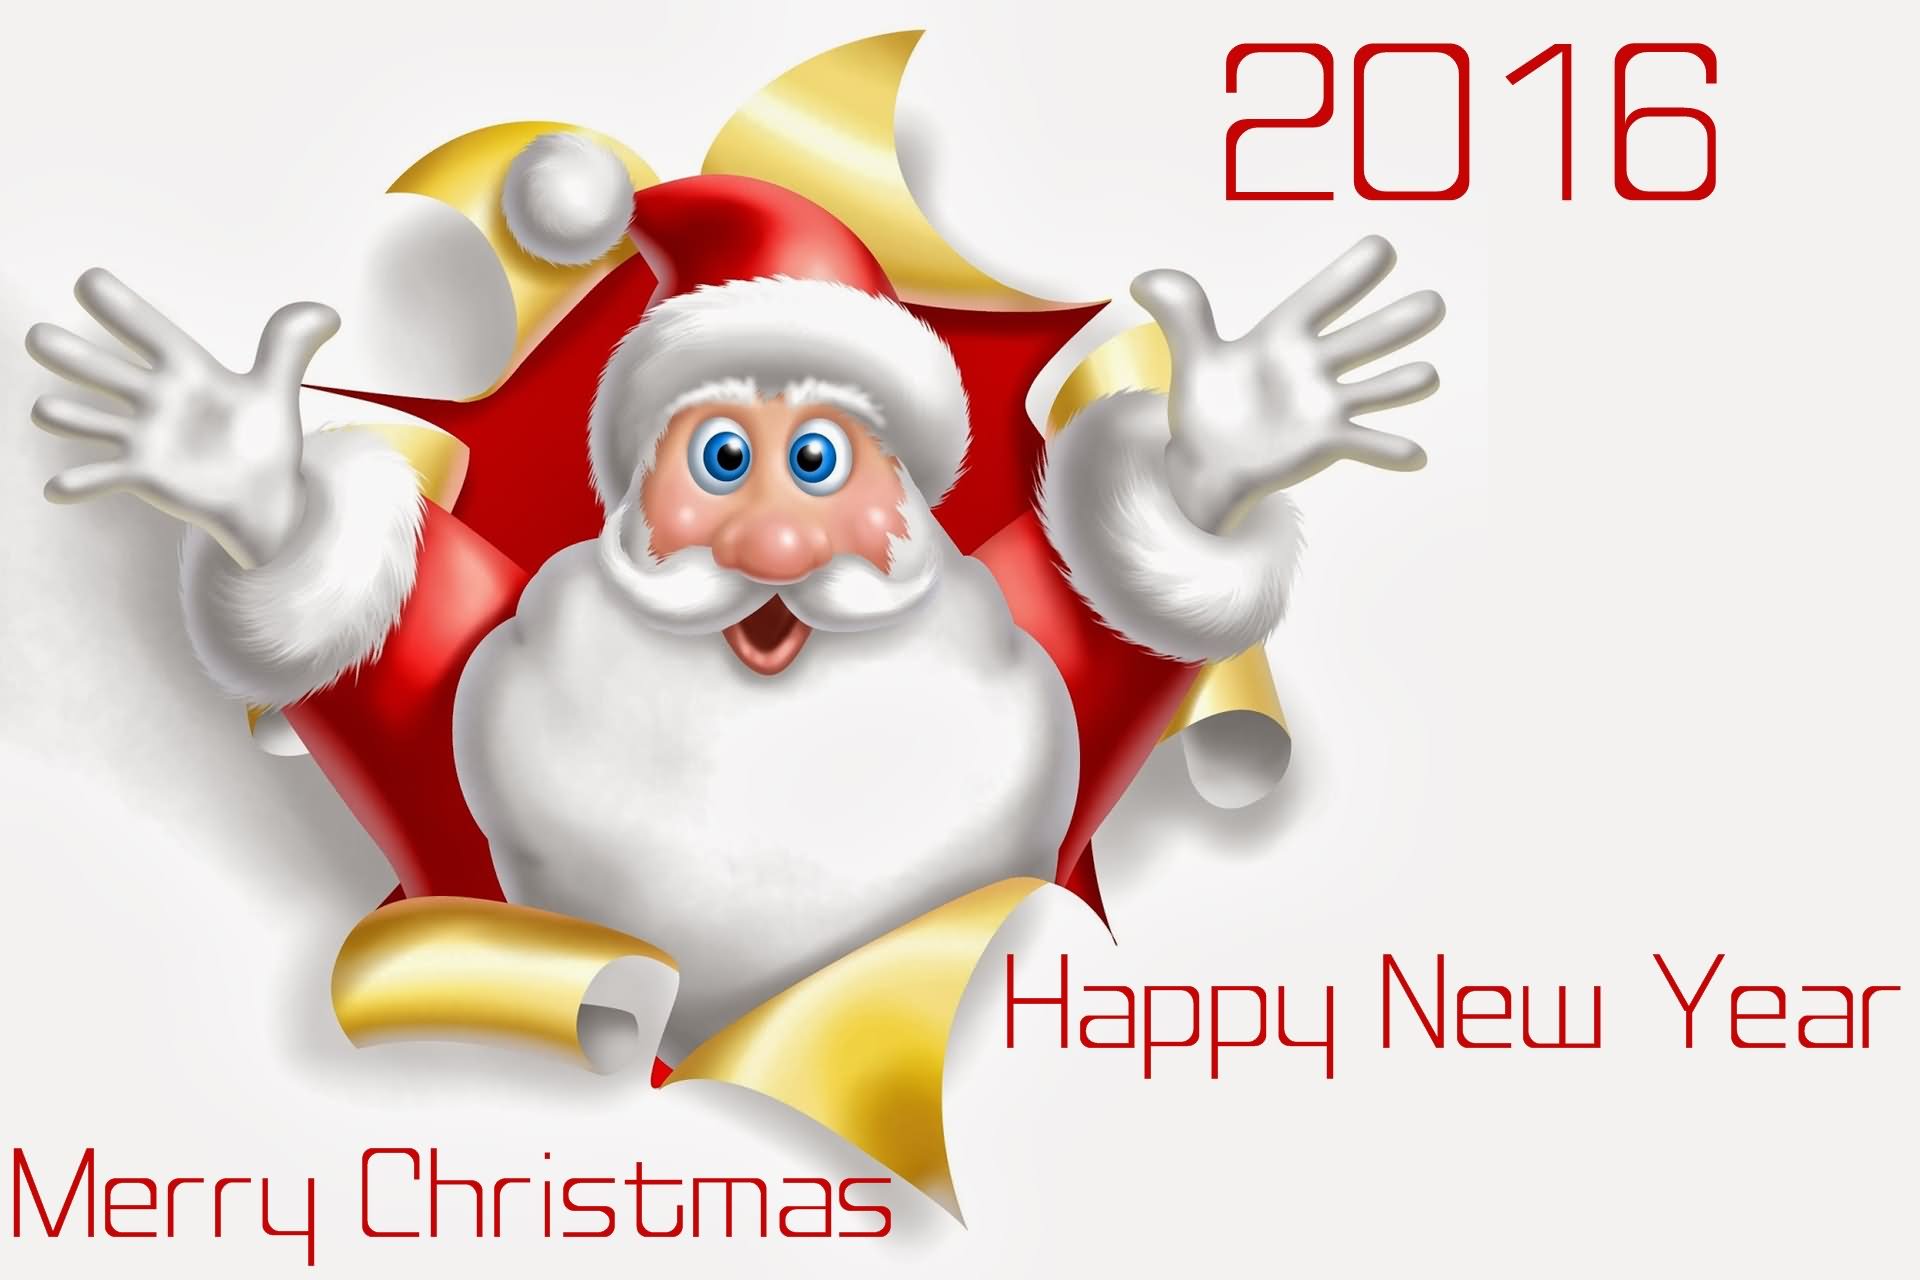 Santa Claus Wishes You Merry Christmas And Happy New Year 2016